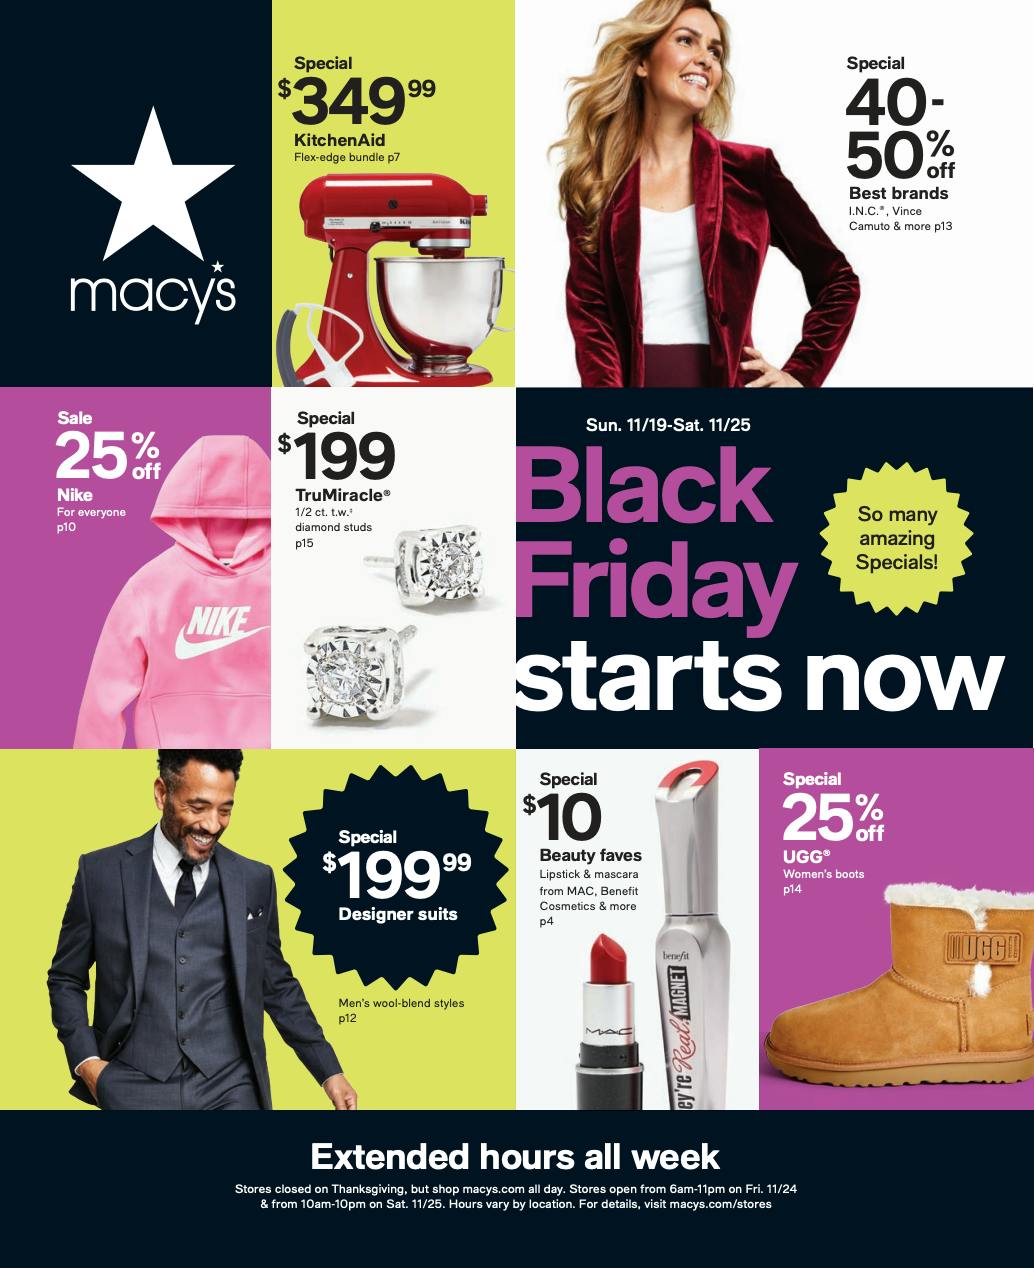 Macy's: 40-50% off clearance + extra 20% off! Shop now & save big.